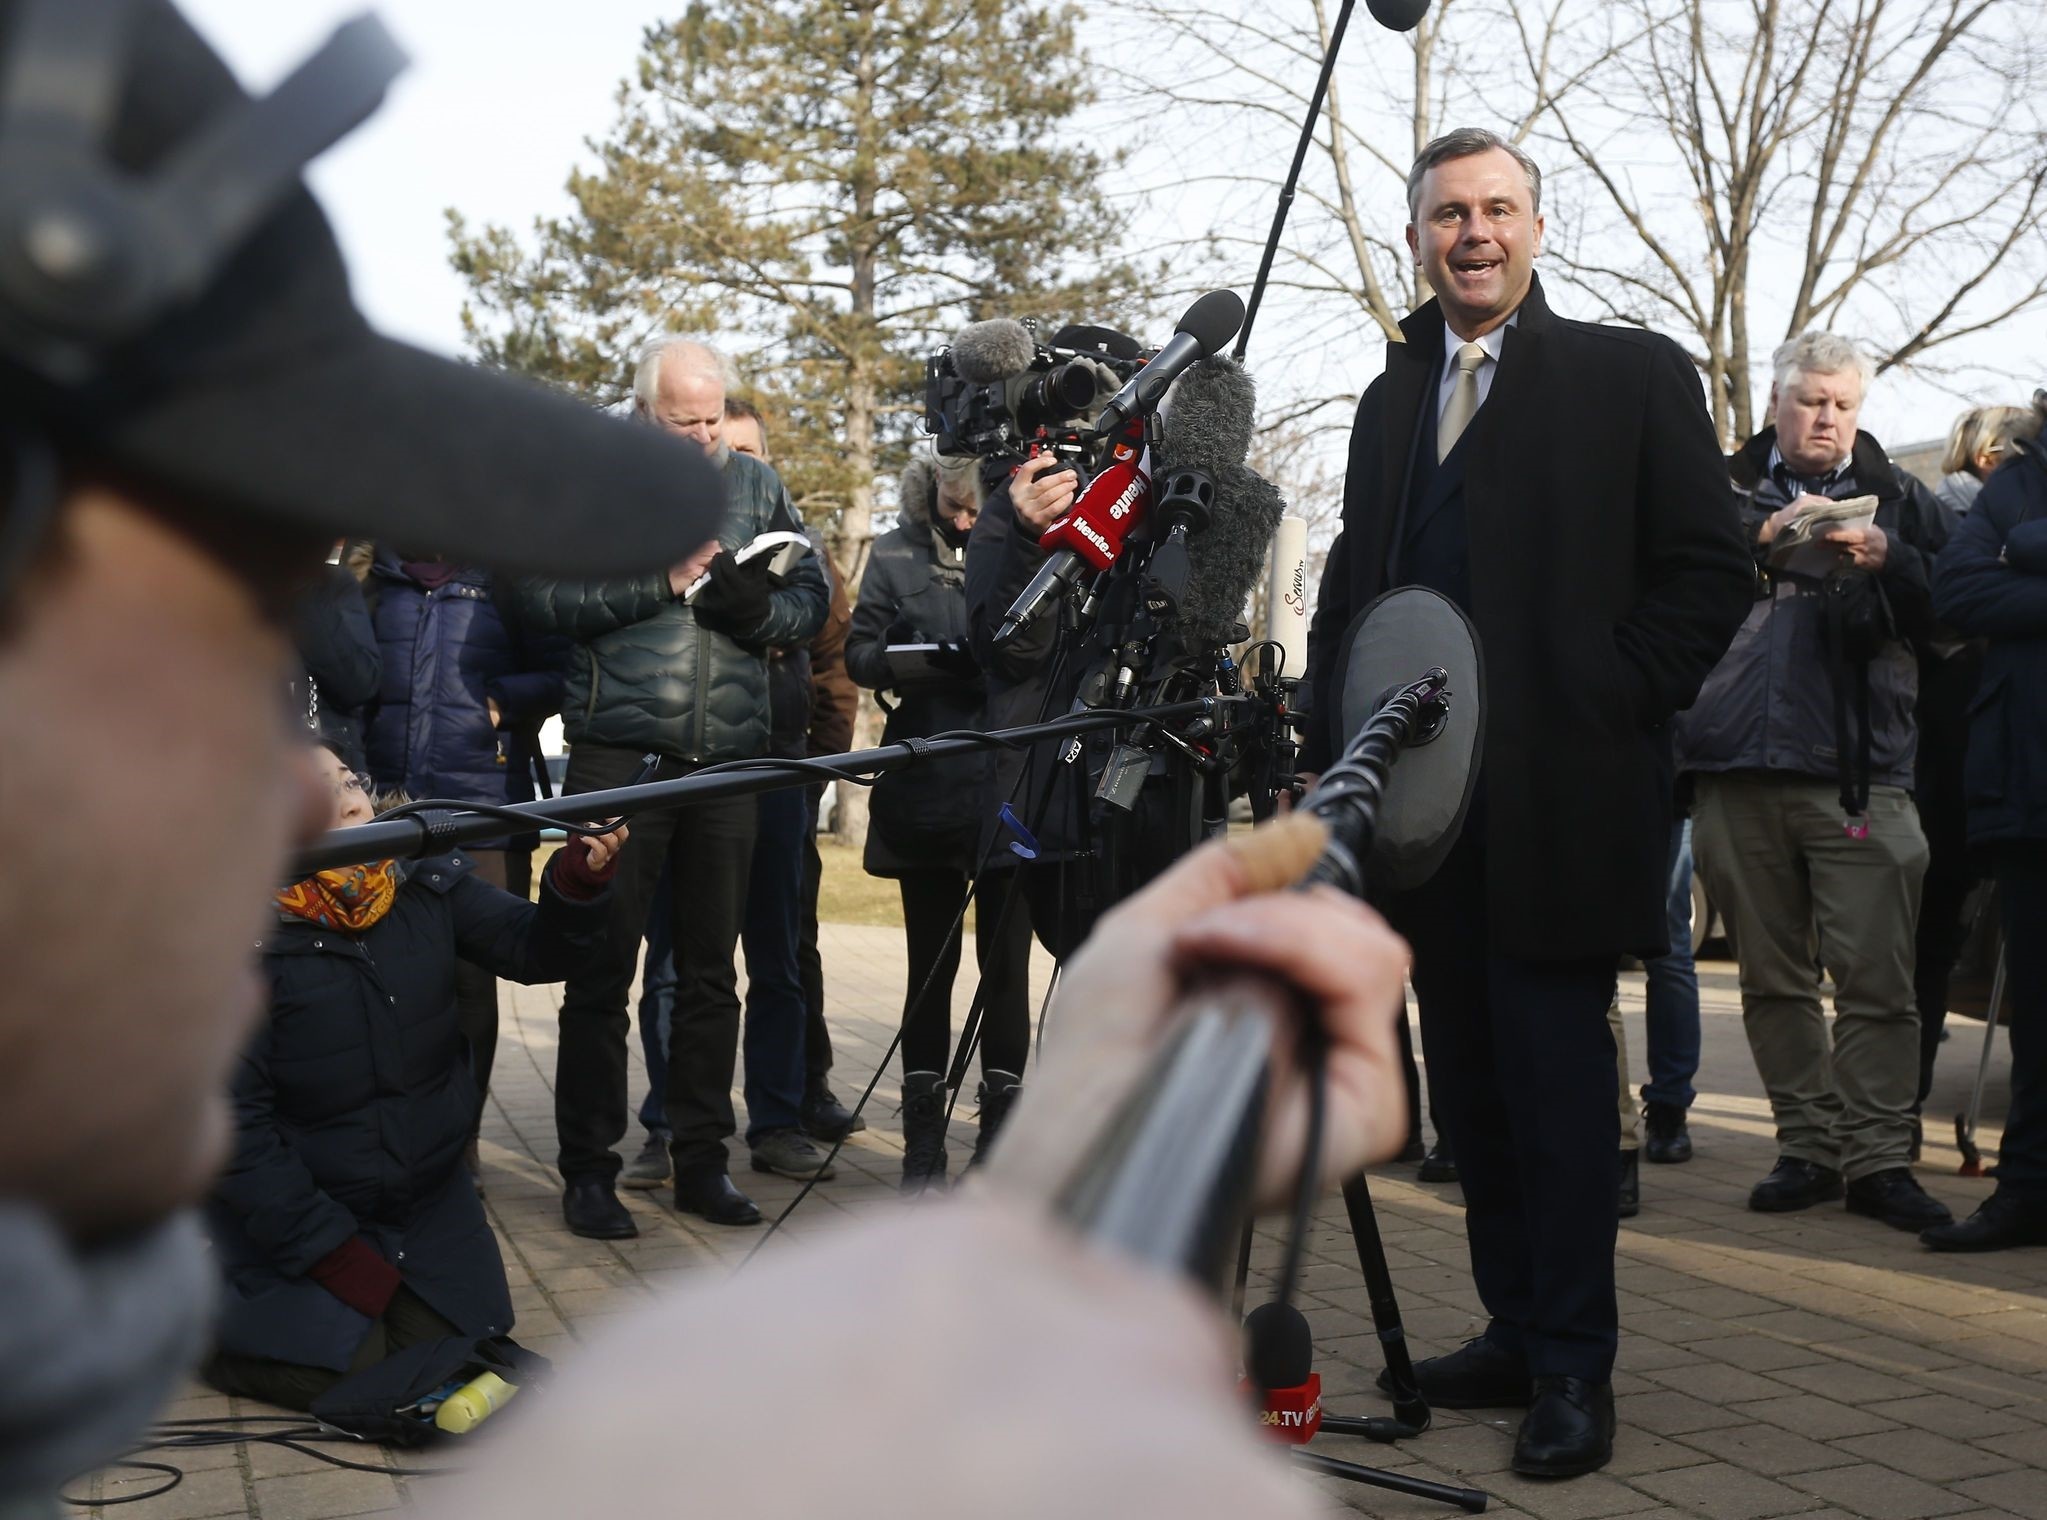 Austrian far-right Freedom Party (FPOe) presidential candidate Norbert Hofer talks to journalists in Pinkafeld, Austria on December 4, 2016. (AFP PHOTO)